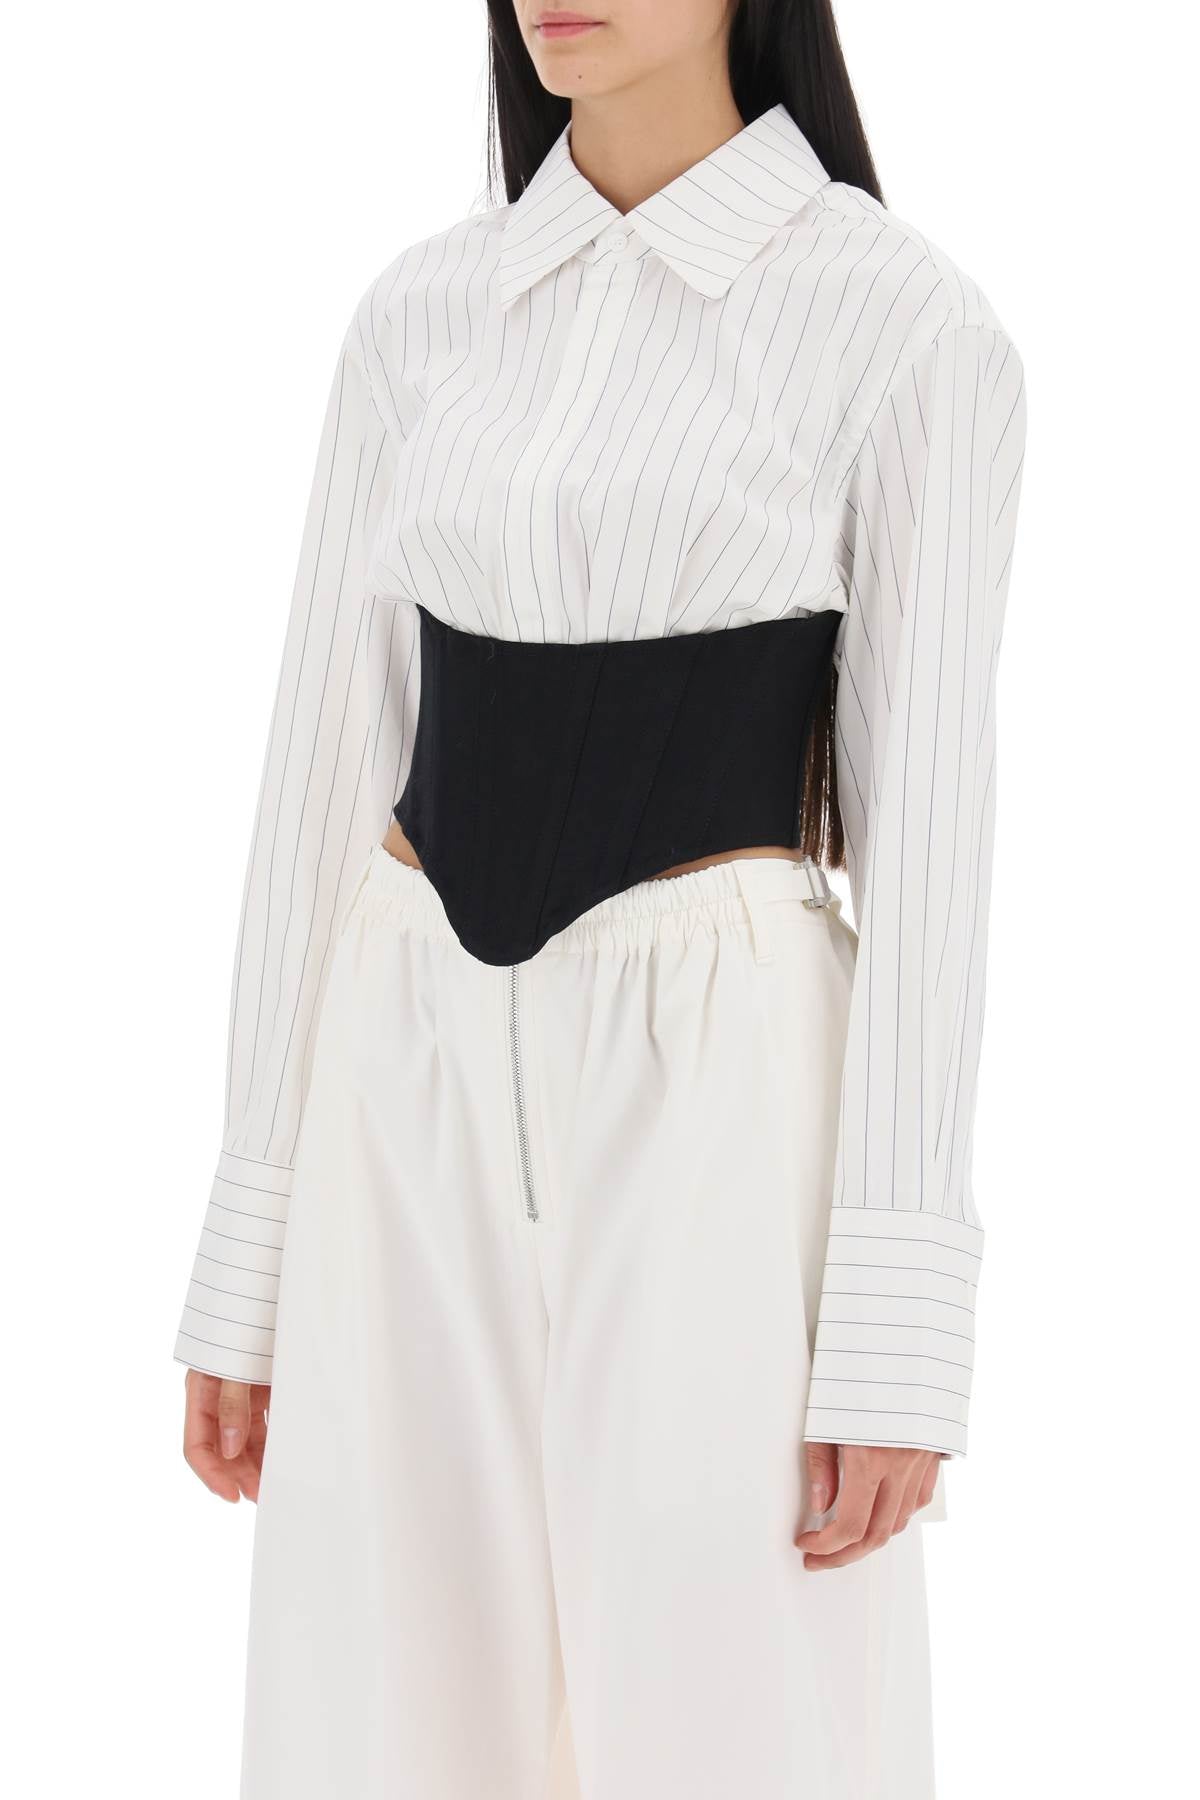 Dion lee cropped shirt with underbust corset-3